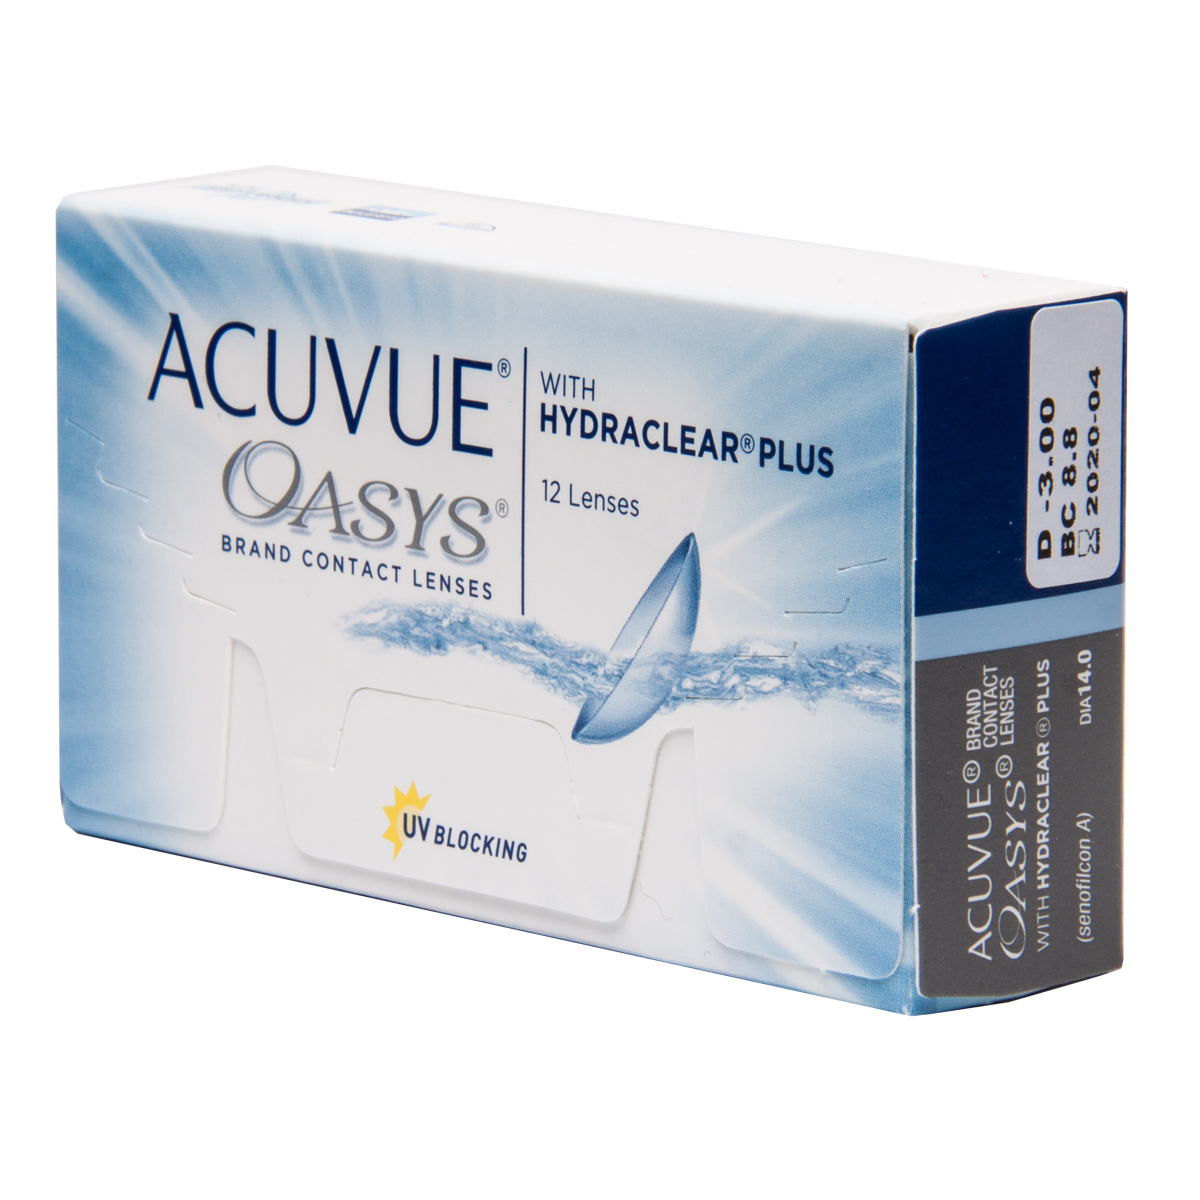 acuvue-oasys-with-hydraclear-plus-12